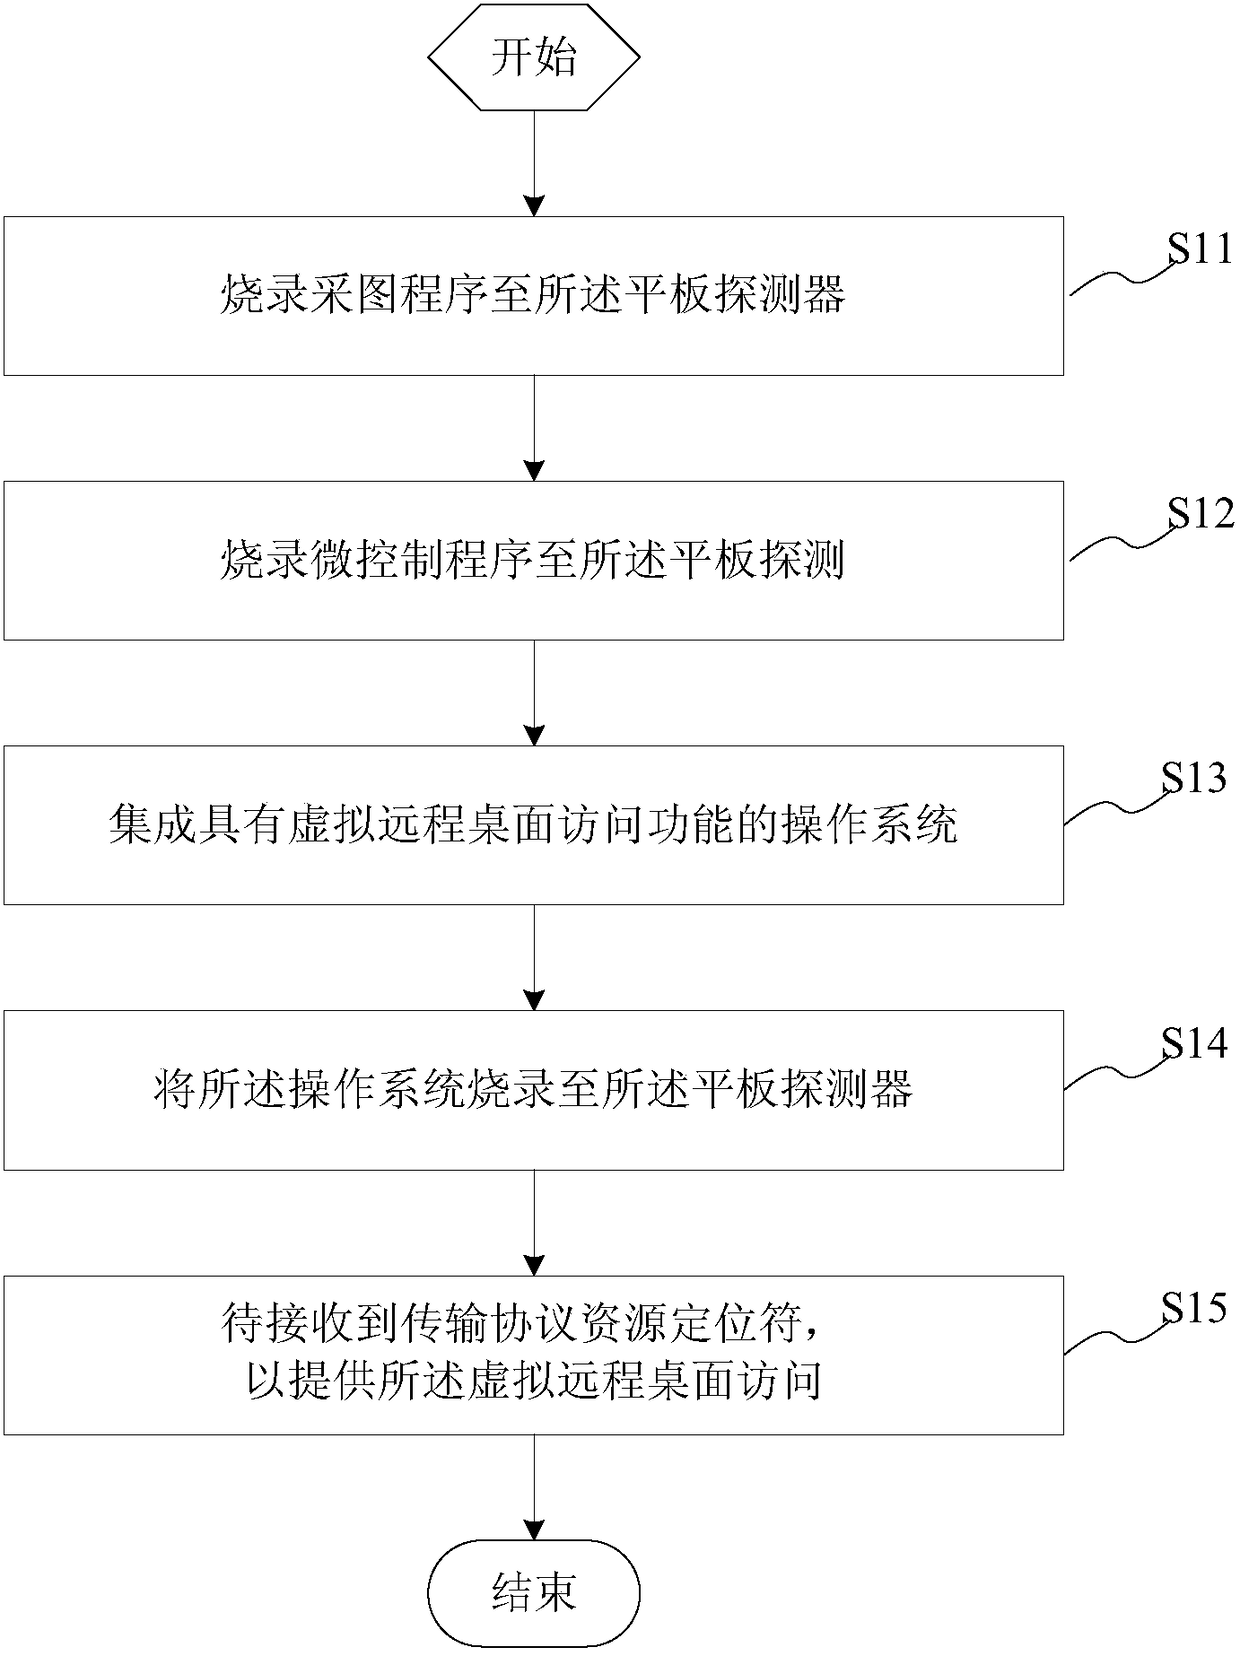 Virtual remote desktop access management method/system, medium and electronic device